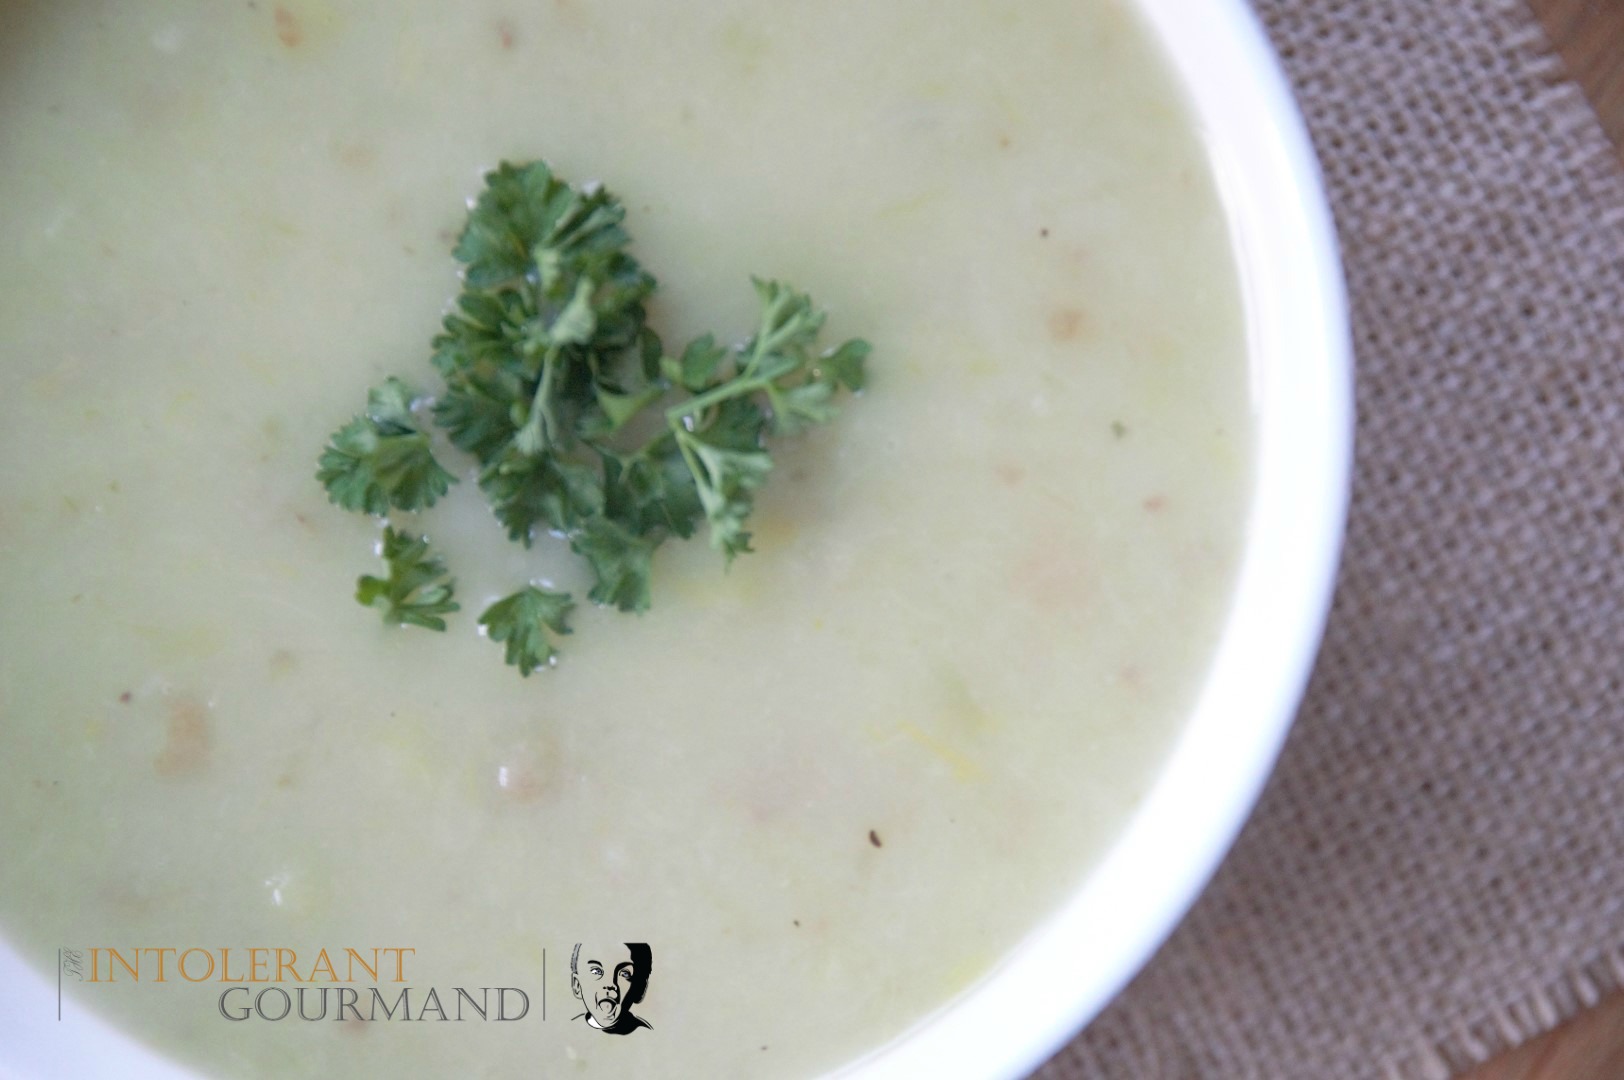 Potato Leek Soup - a classic and iconic recipe, that is the ultimate in comfort food! Naturally gluten-free and packed with nutrients! www.intolerantgourmand.com